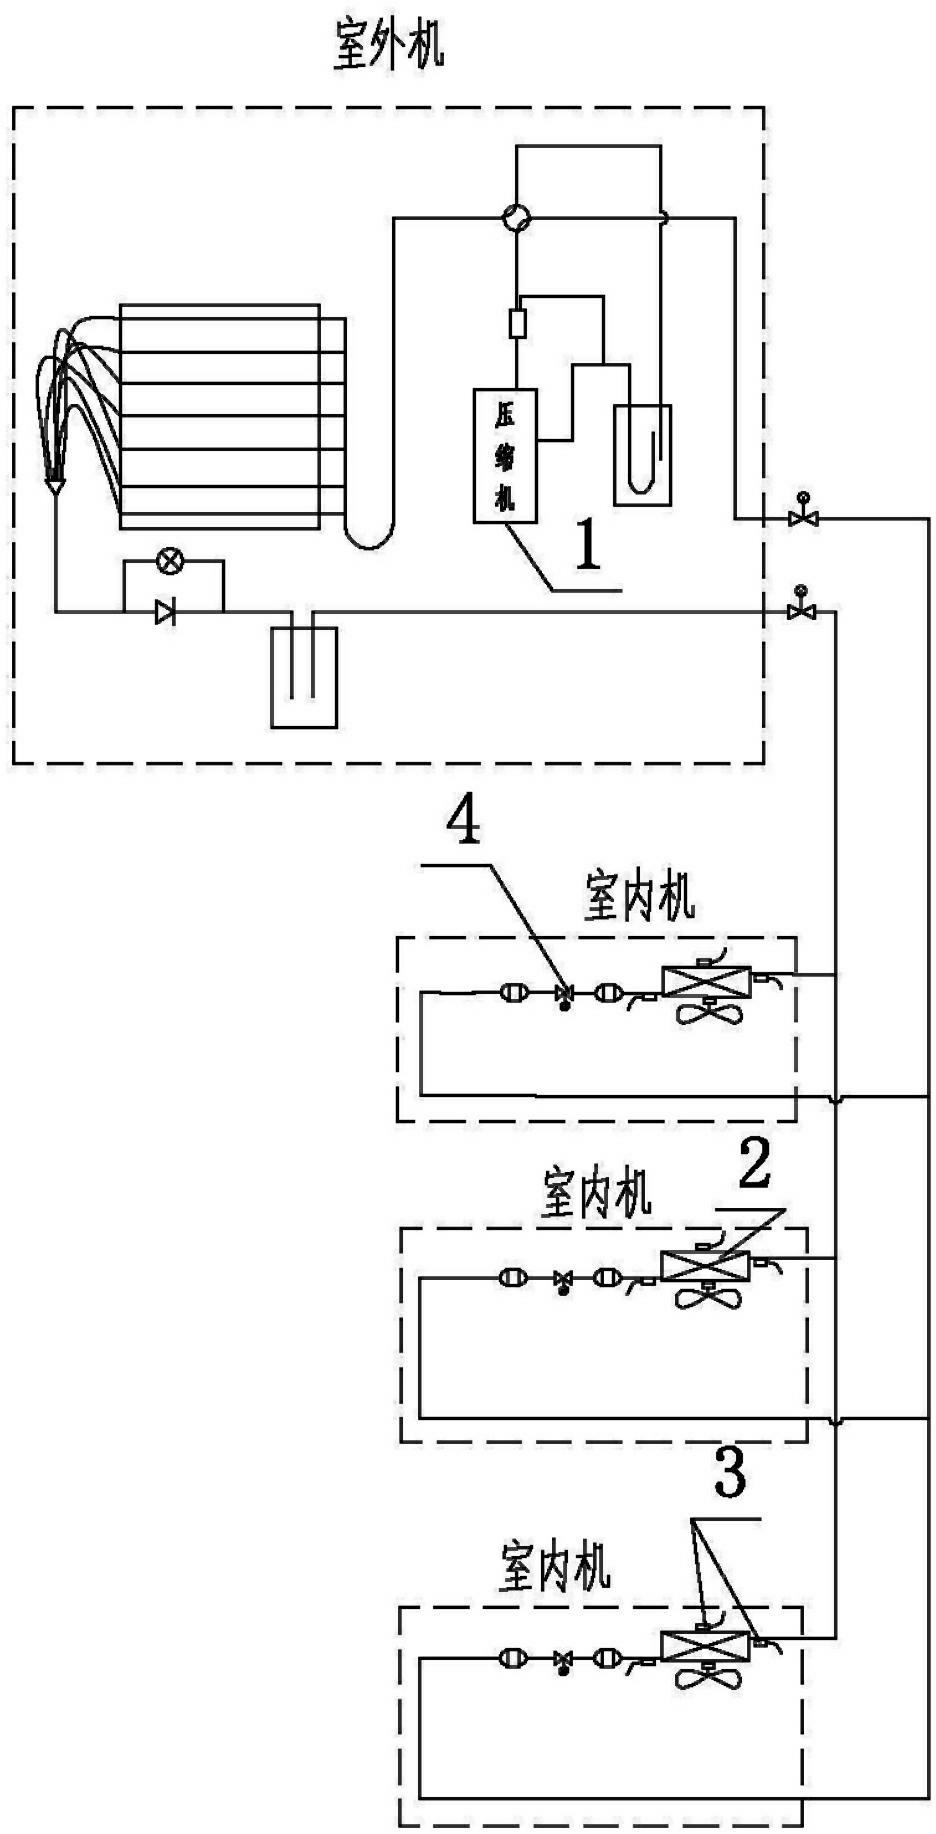 The Control Method of Preventing Refrigerant Drift Flow During Heating of Multi-connected Air Conditioning Units